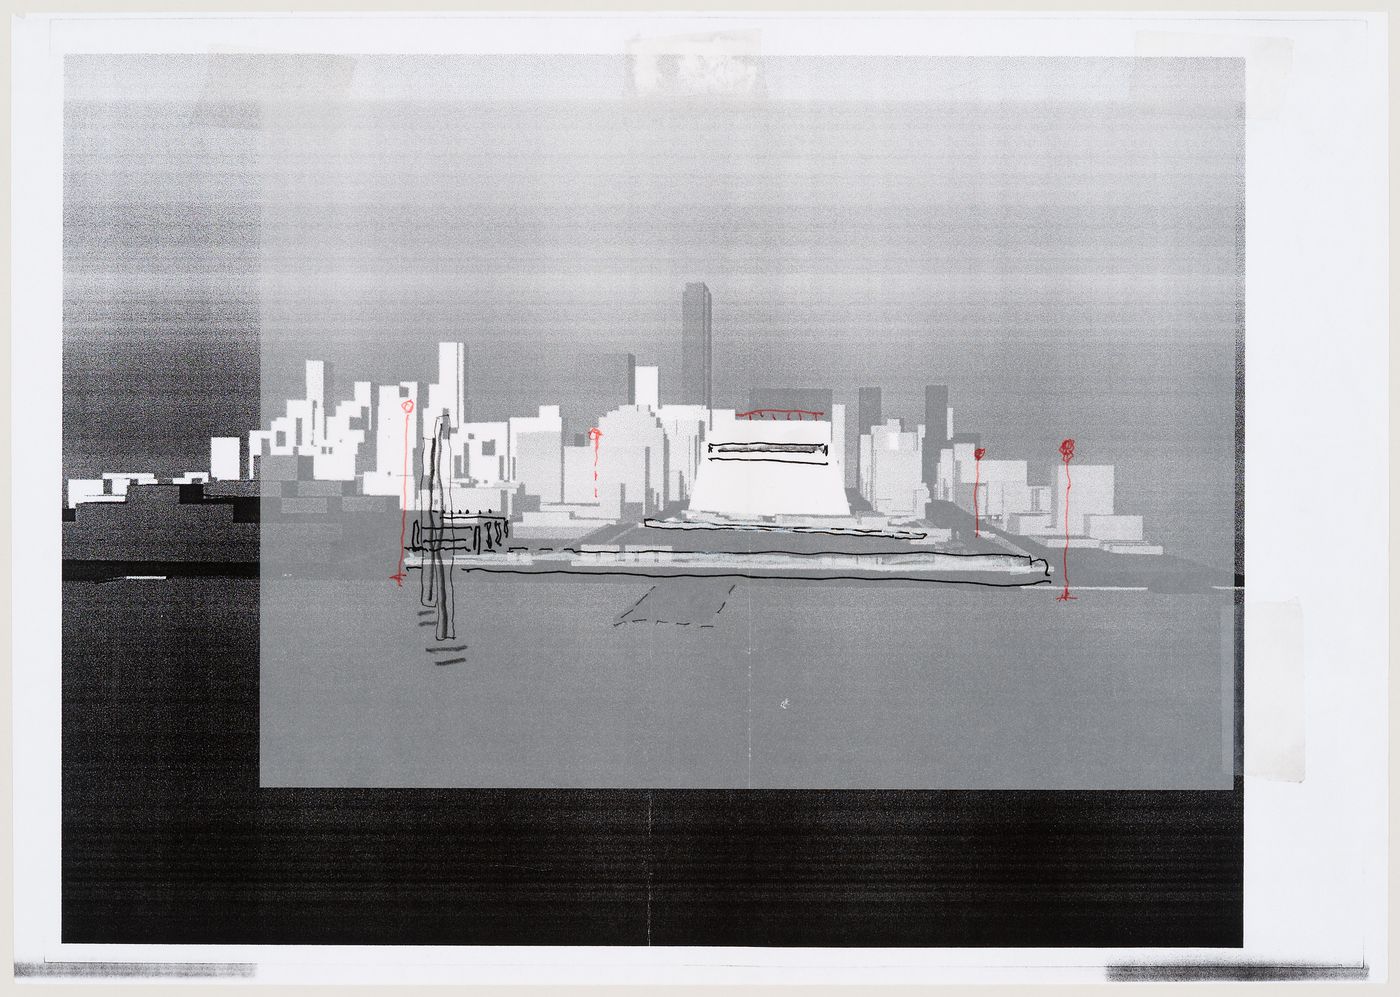 Project of Cedric Price Architects for the IFCCA Prize for the Design of Cities competition: perspective view looking east from the Hudson River (document from the IFPRI project records)